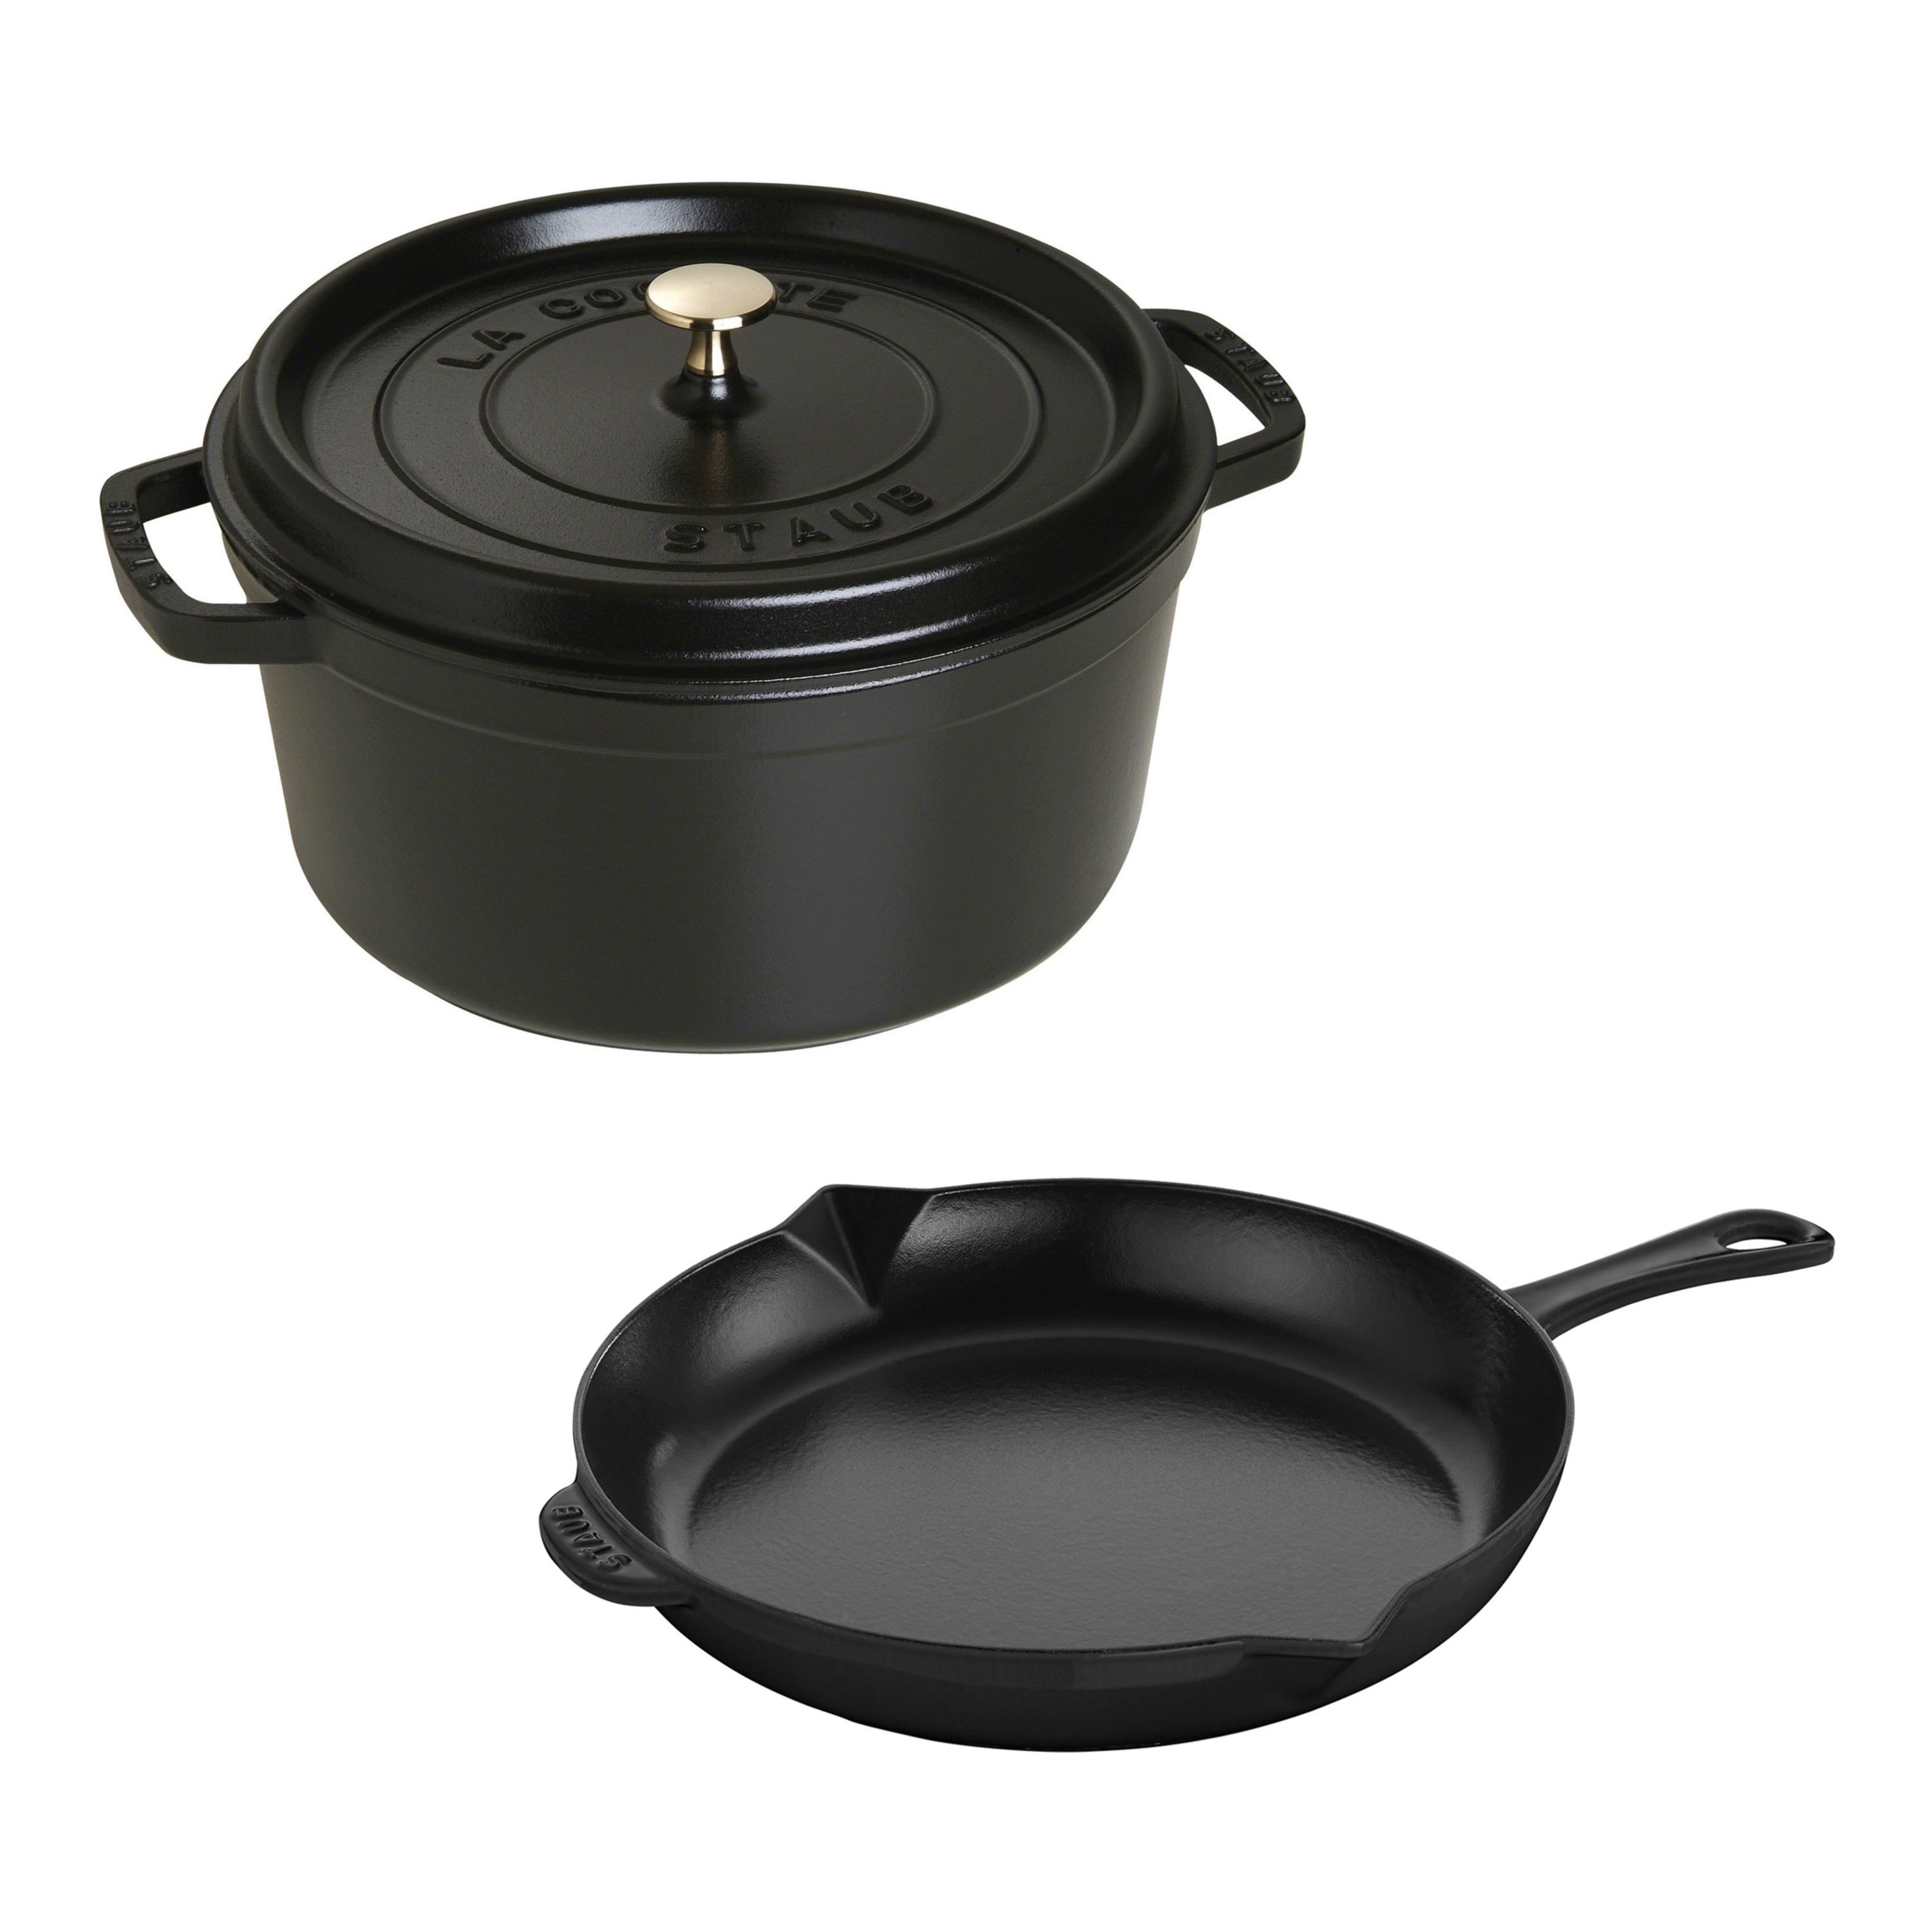 Help! Bought a new staub dutch oven, used for the first time. Is